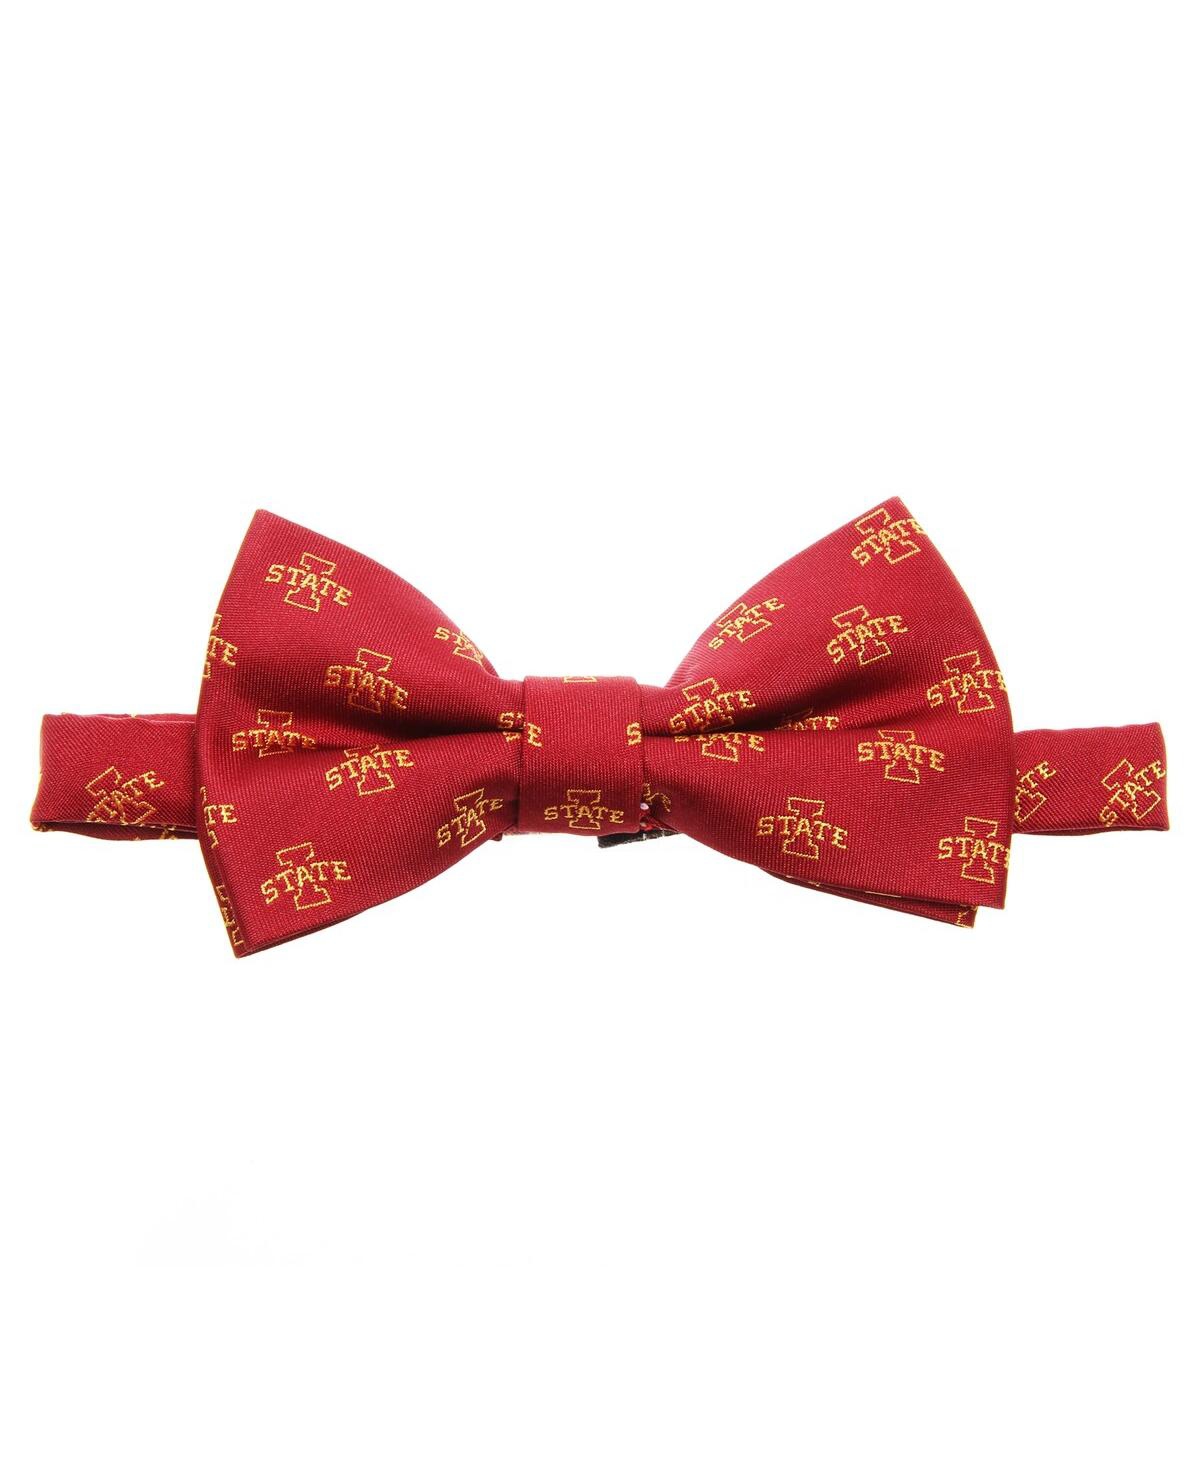 Men's Iowa State Cyclones Repeat Bow Tie - Red